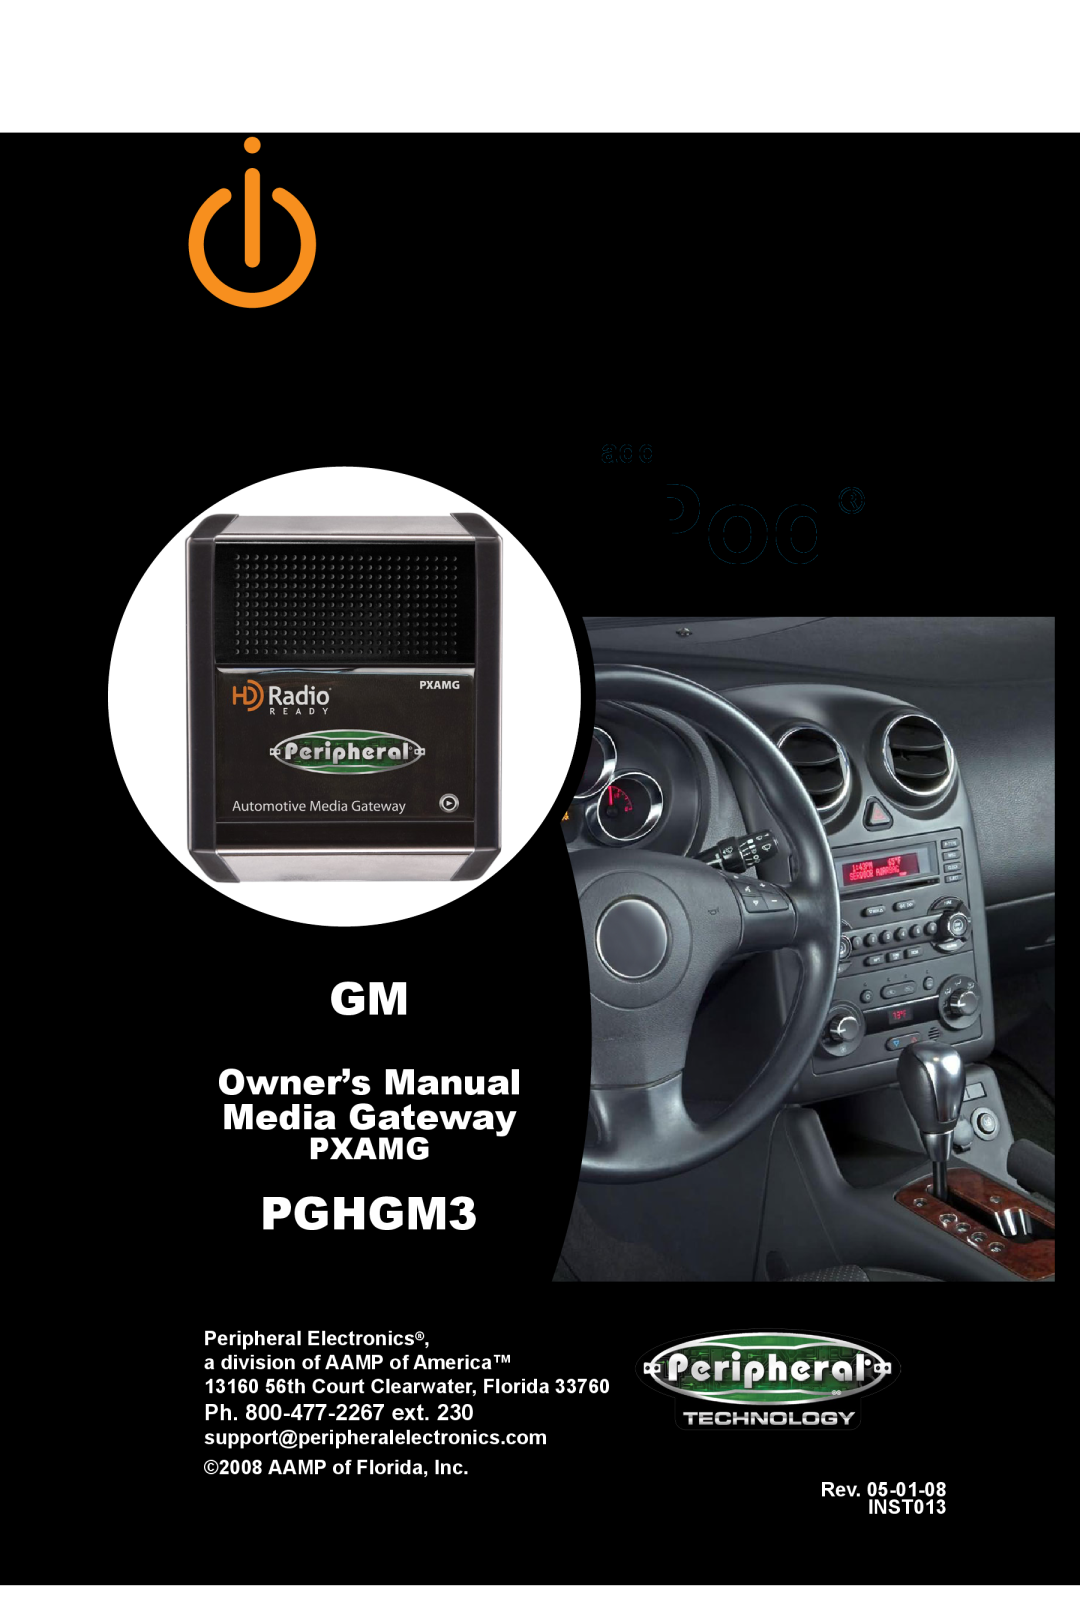 Peripheral Electronics owner manual iPod, Owner’s, Expand Your Factory Radio, Media Gateway PGHGM3 PXAMG, Pxamg 